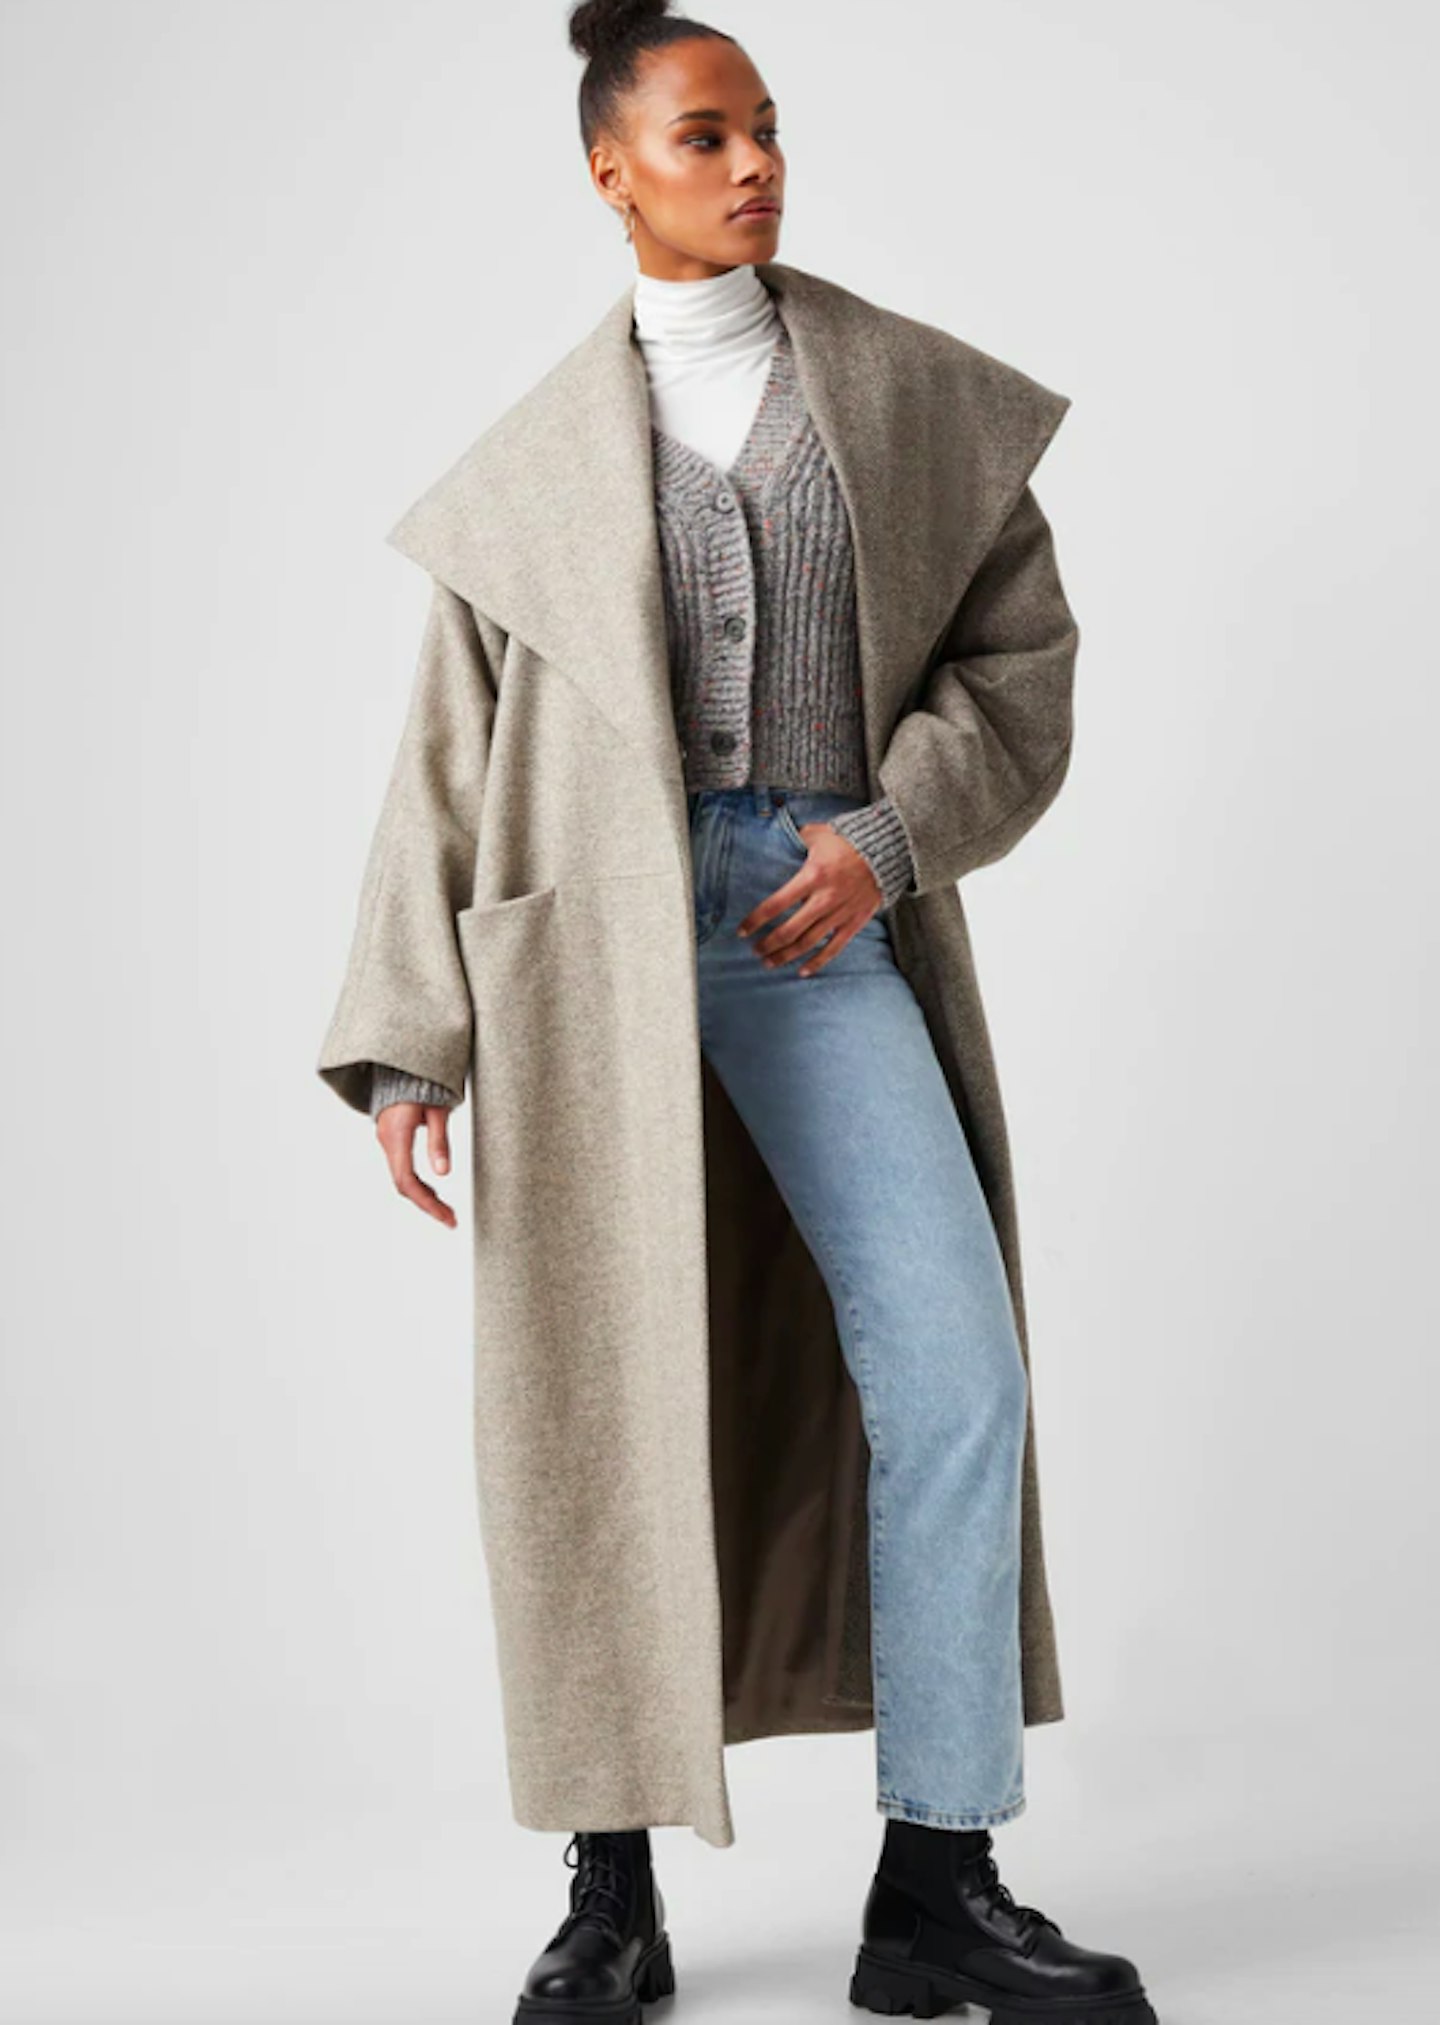 French Connection, Edith Wool-Blend Coat, WAS £295 NOW £147